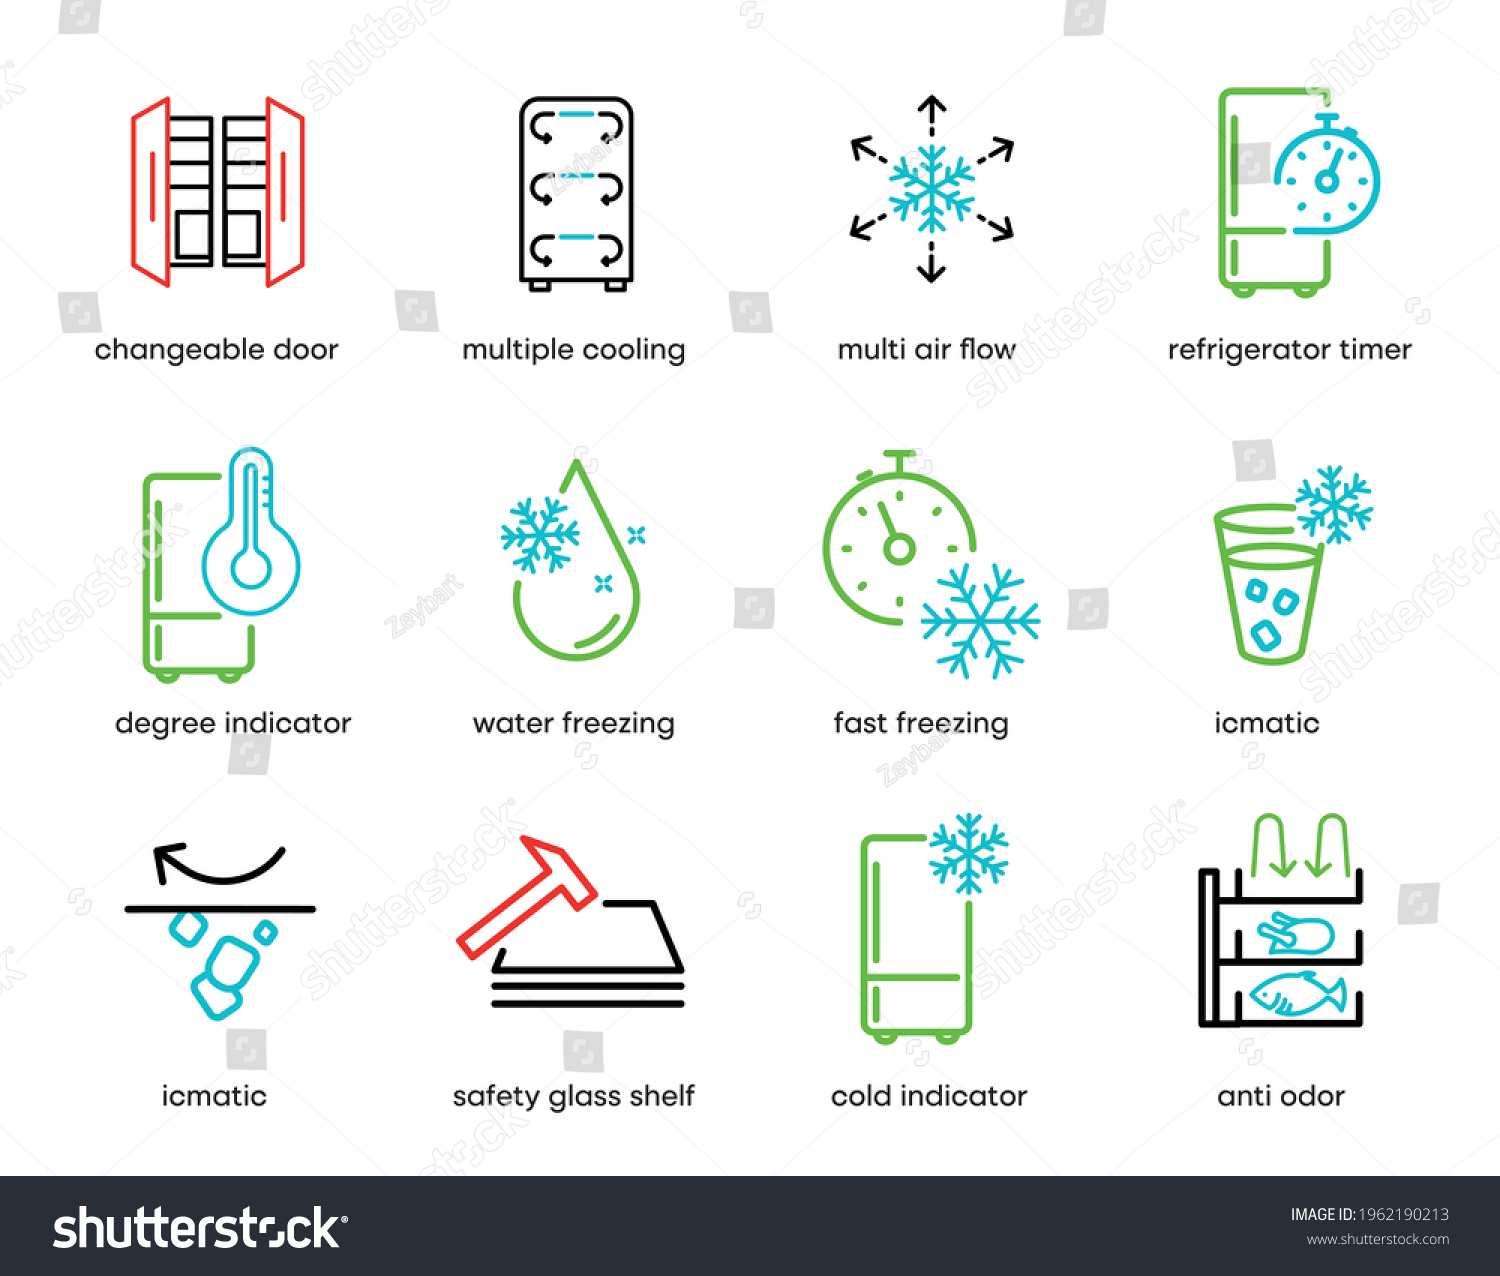 SVG of Refrigerator icon set. These icons are fast freezing, anti odor, refrigerator timer, ice machine, multi air flow etc. icons. Colorful refrigerator button icon. Editable Stroke. Logo, web and app. svg